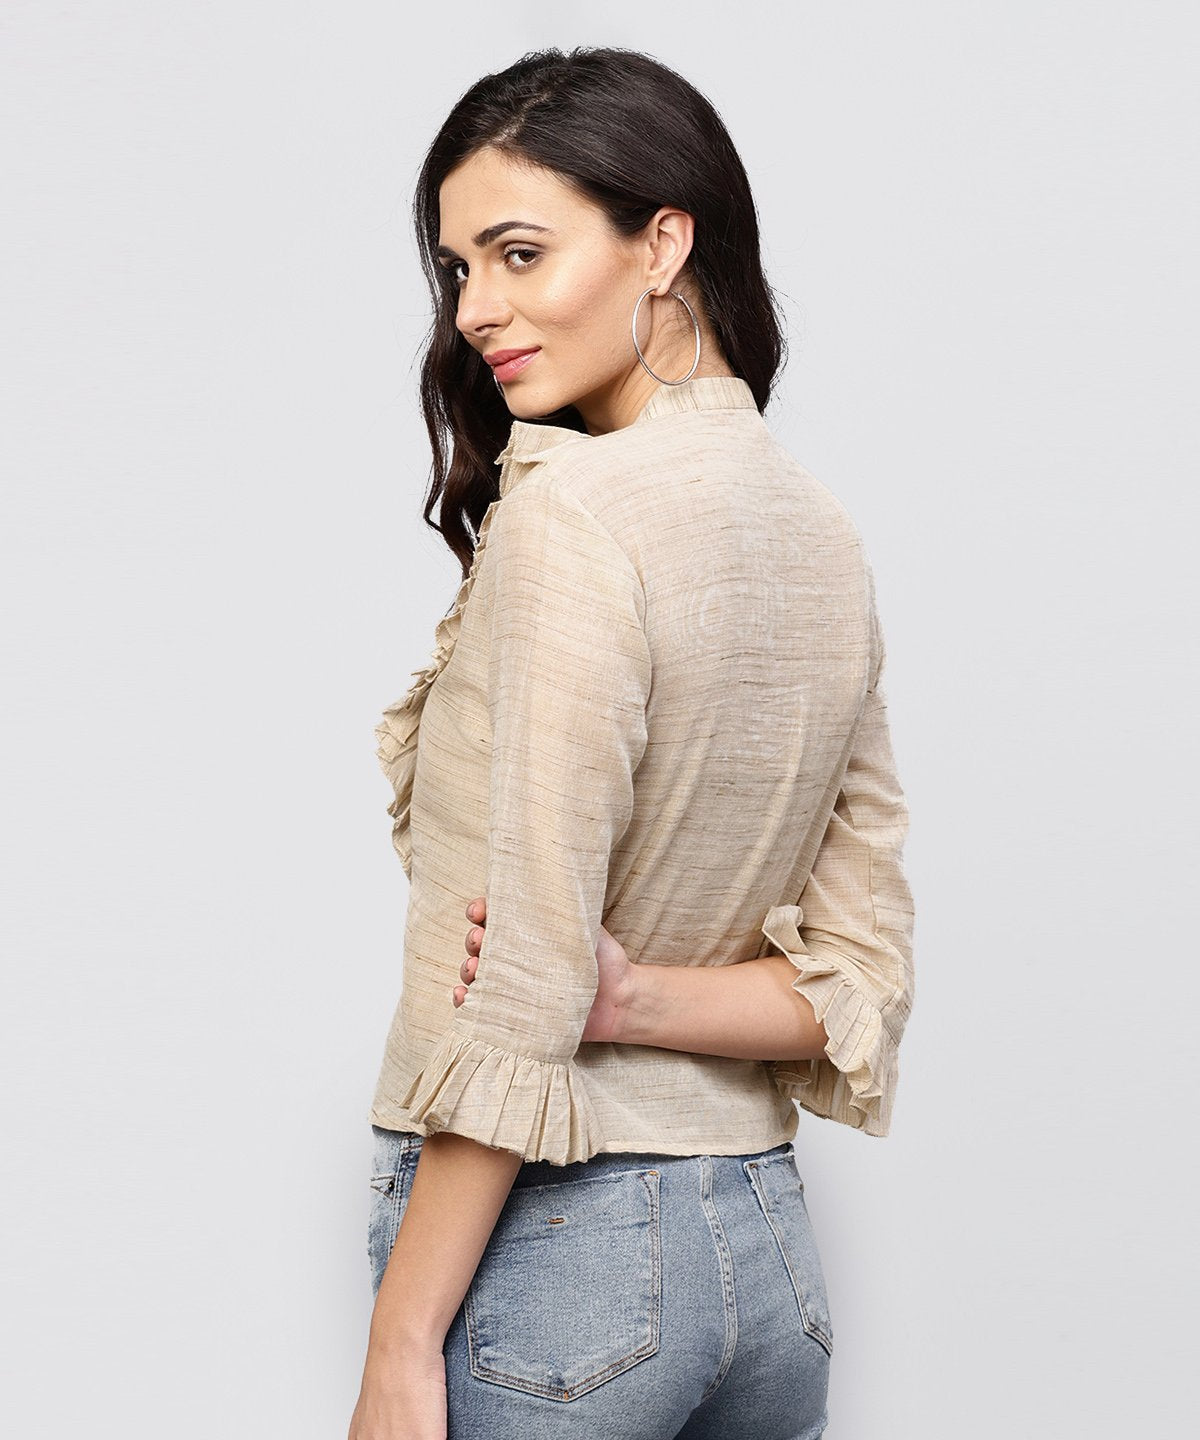 Women's Ruffled Yoke With Open Center Placket Top With Pleated Sleeves And Madarin Collar - Nayo Clothing